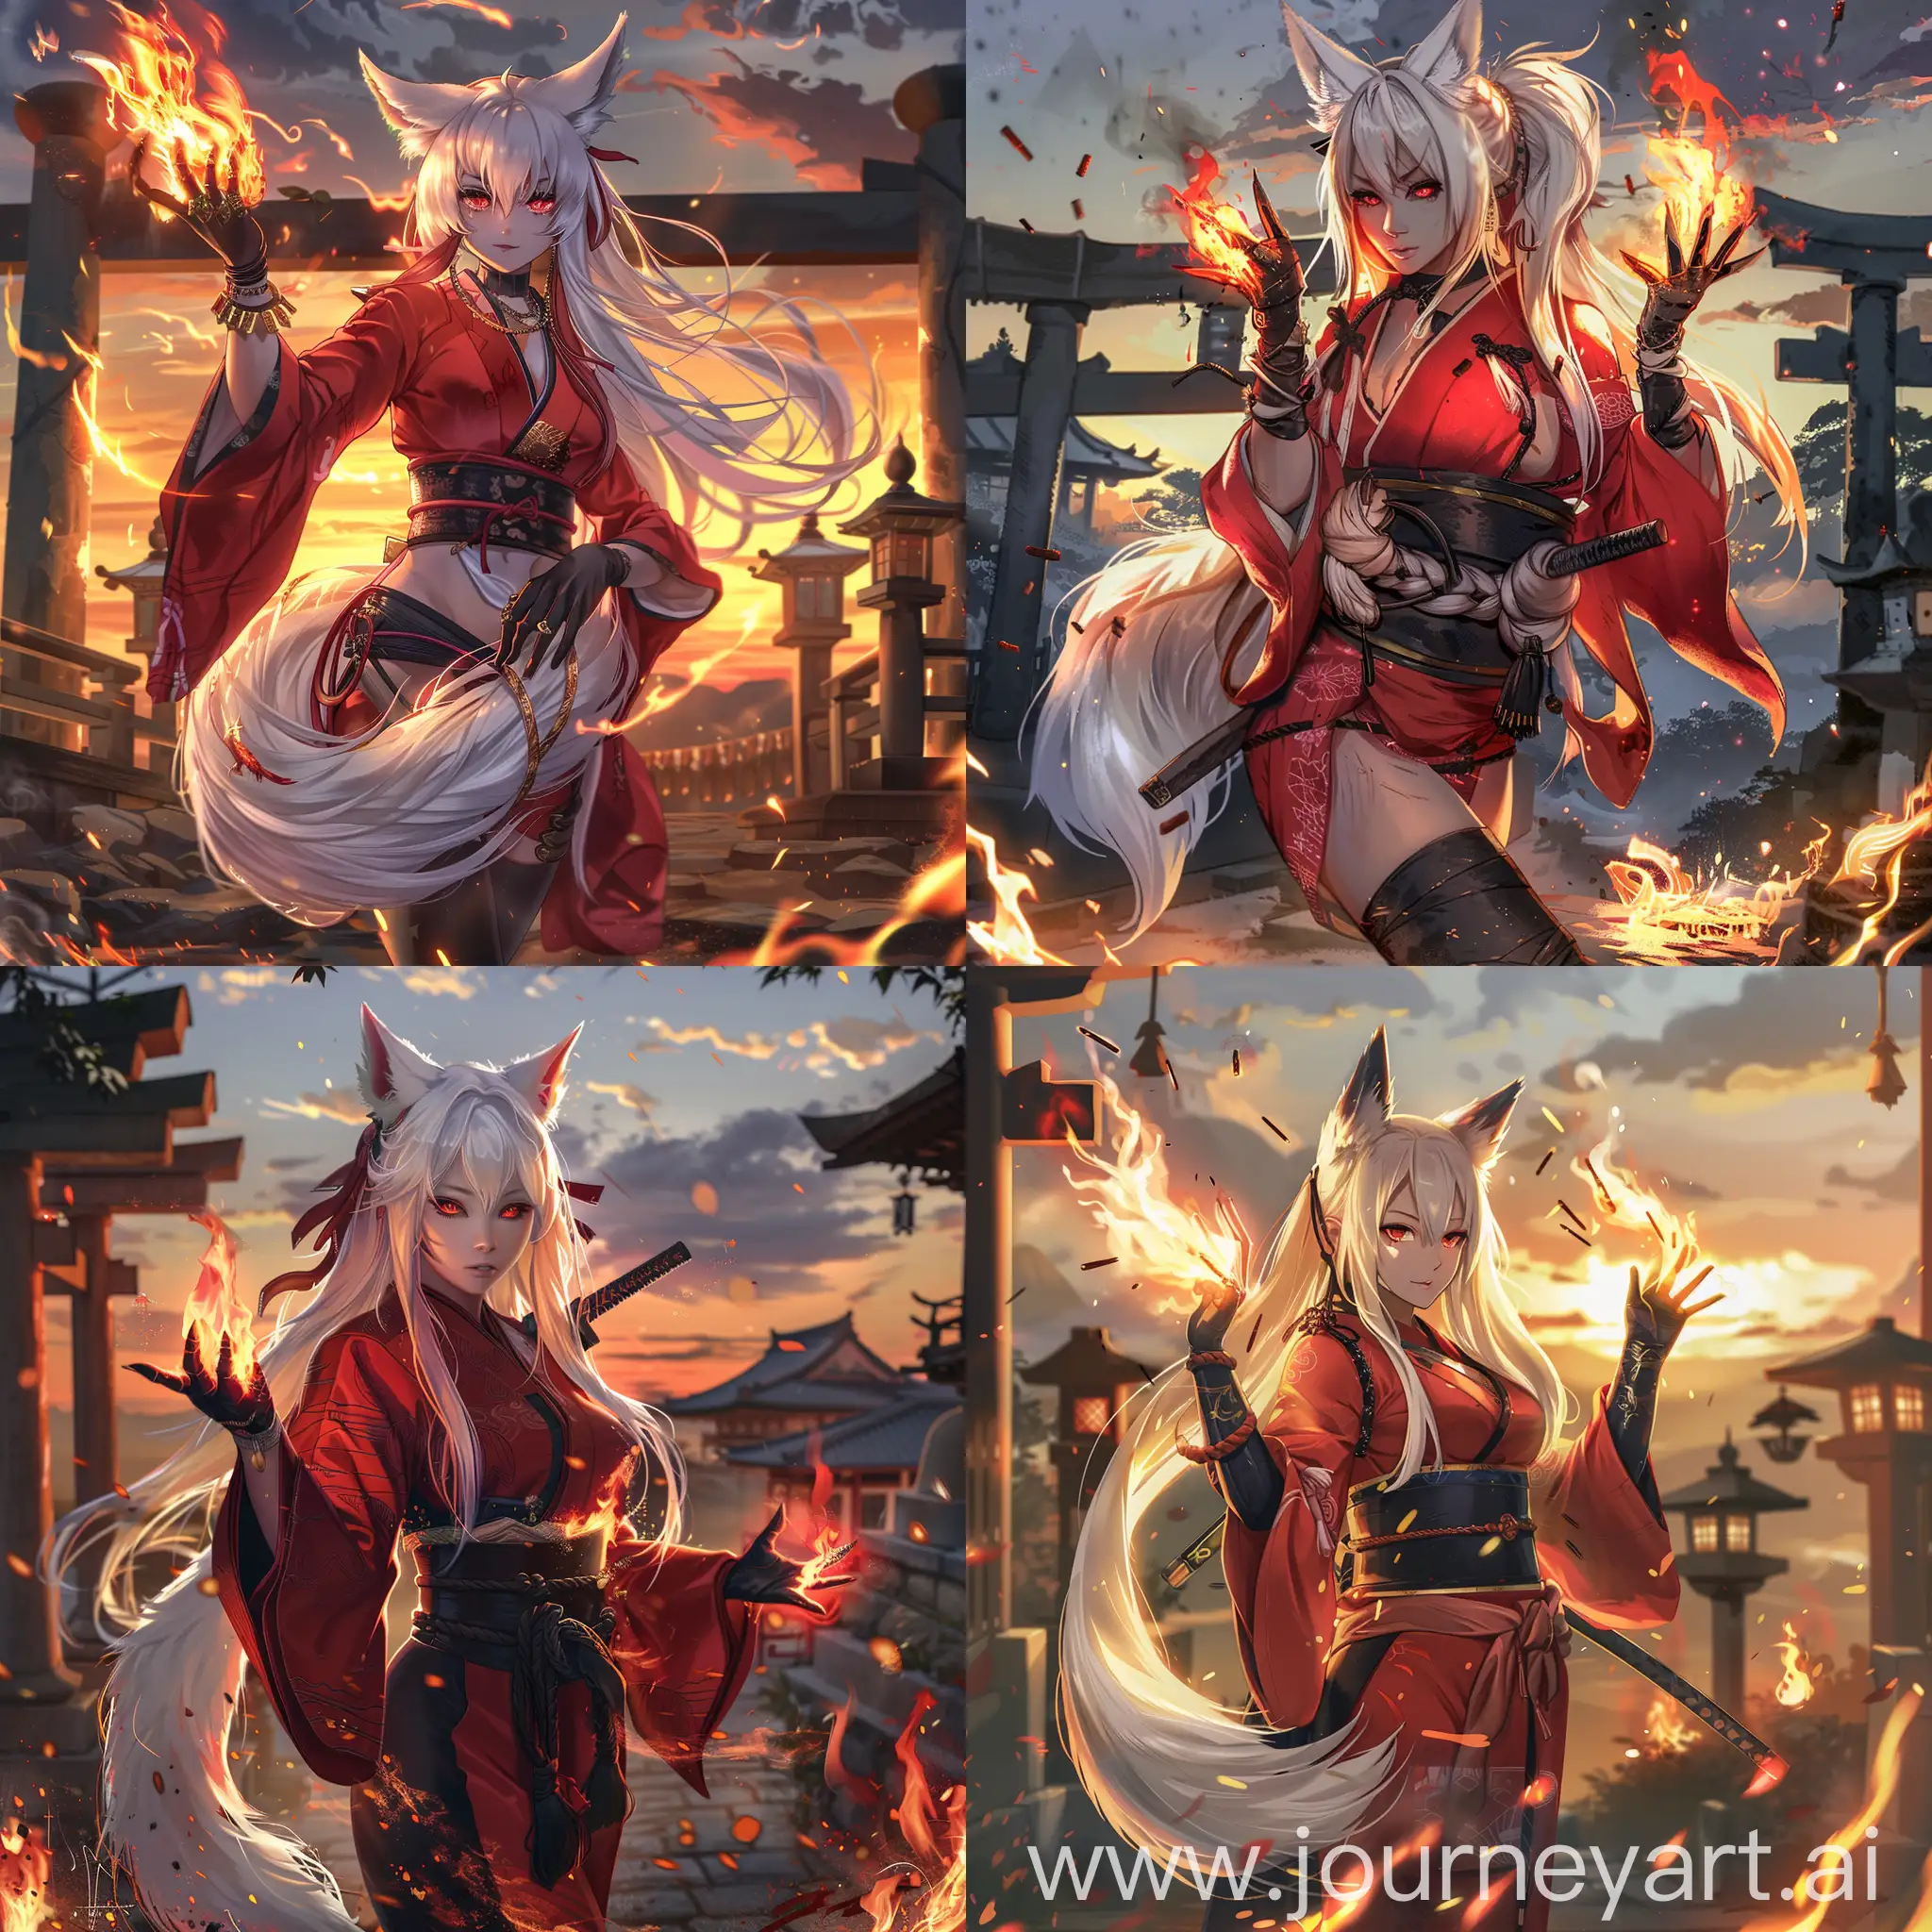 anime-style, full body, athletic, beautiful, tan skin, asian woman, long white hair, white fox ears, white fox tail attached to her waist, fiery red eyes, wearing a red kimono, black hakama, black sash, long black gloves, black leather boots, casting fire magic, hands wrapped in fire,  good anatomy, dynamic, embers falling in foreground, shinto shrine, sunset